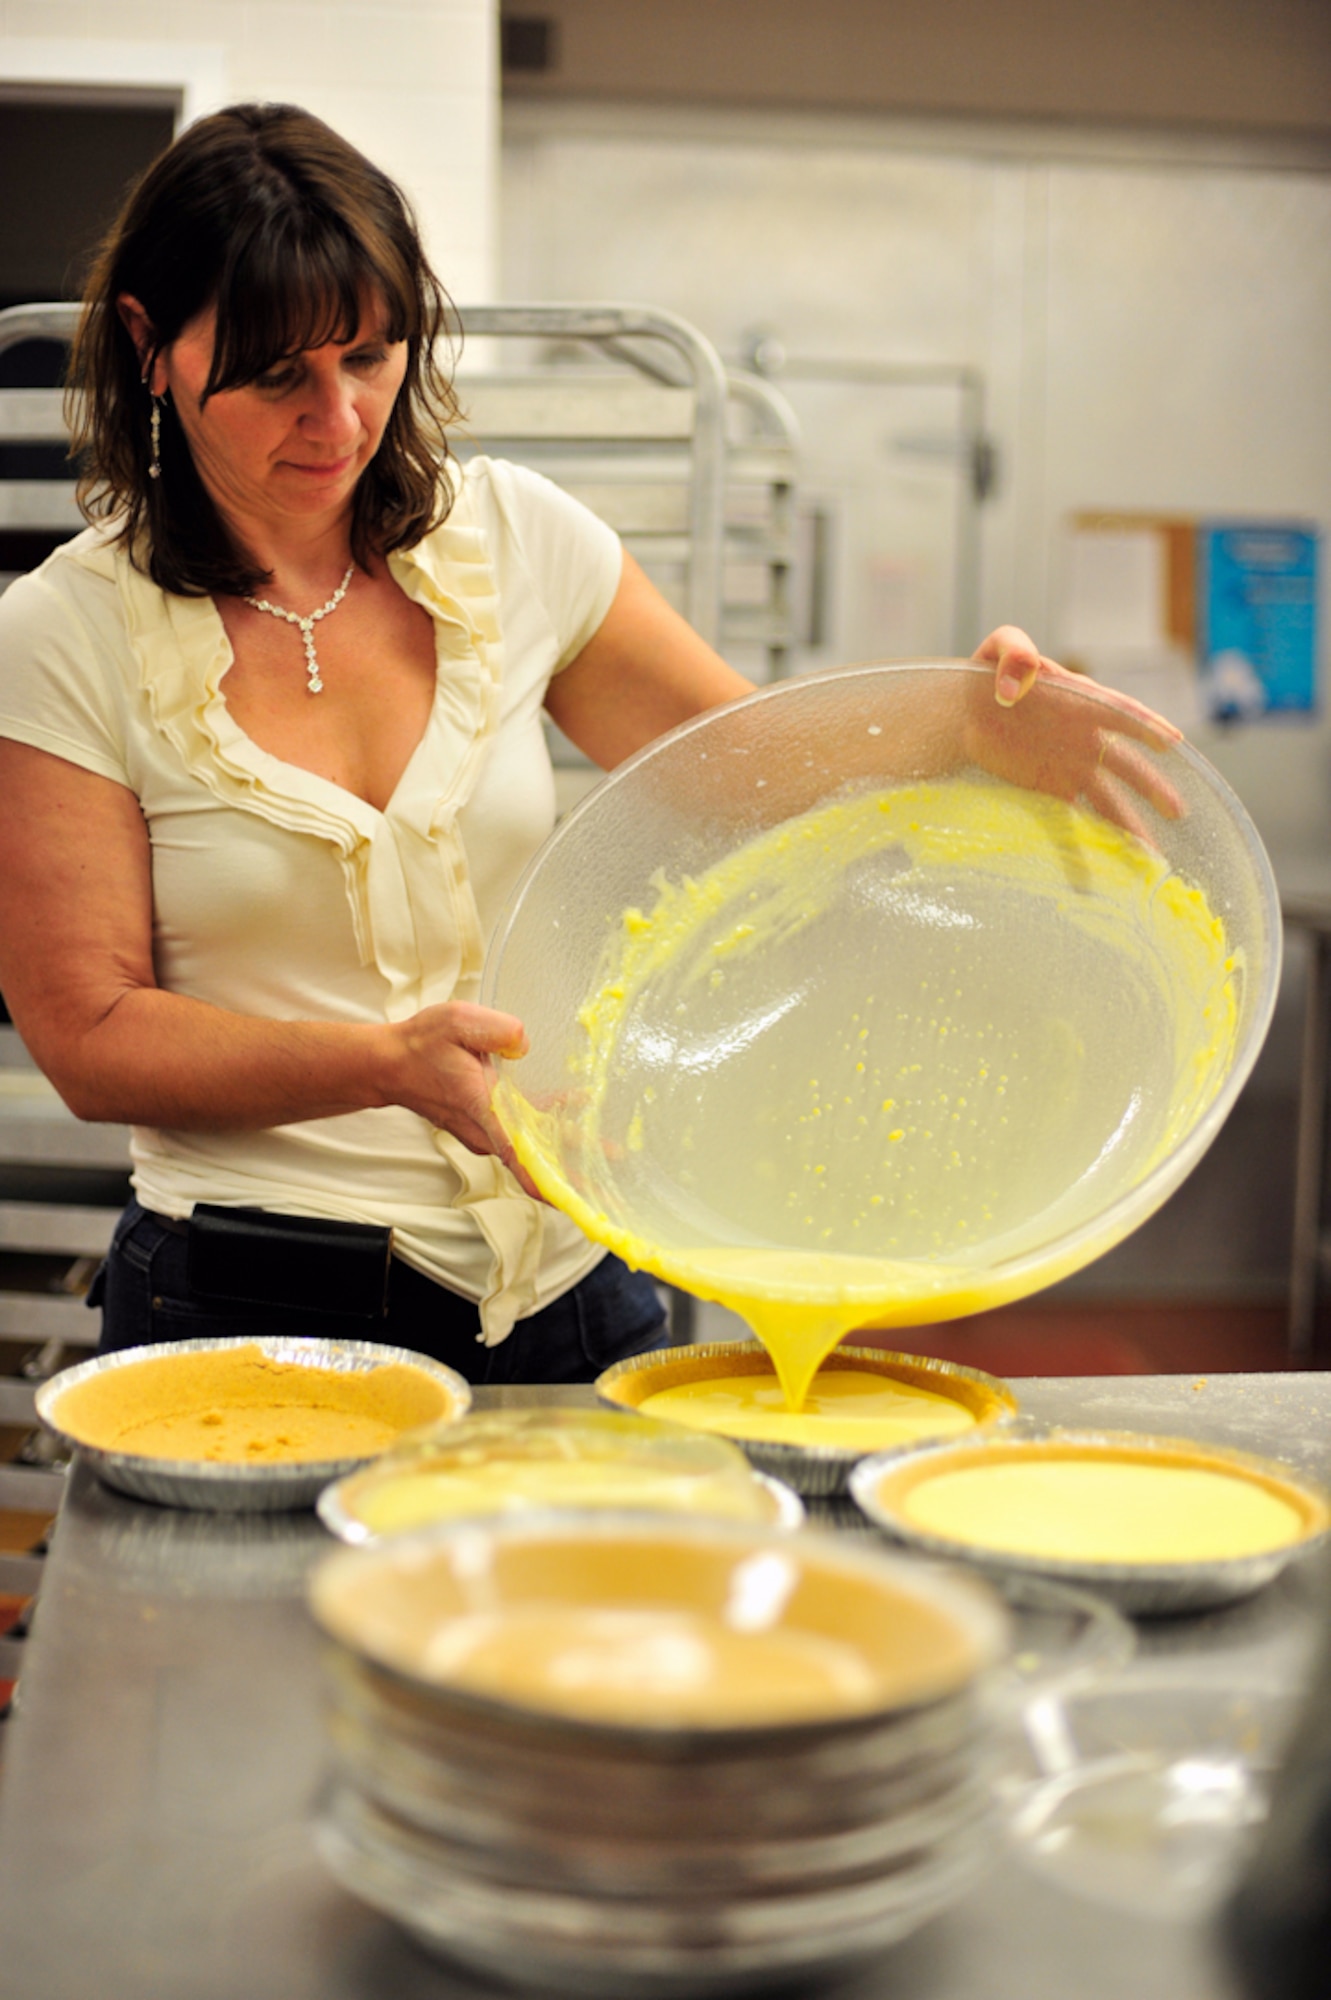 BUCKLEY AIR FORCE BASE, Colo. --  Barbara Magyar, 460th Force Support Squadron marketing, pours vanilla pudding into the pie crust June 30 in preparation for the pie-eating contest at Freedom Fest the next day. (U.S. Air Force photo by Staff Sgt. Kathrine McDowell)